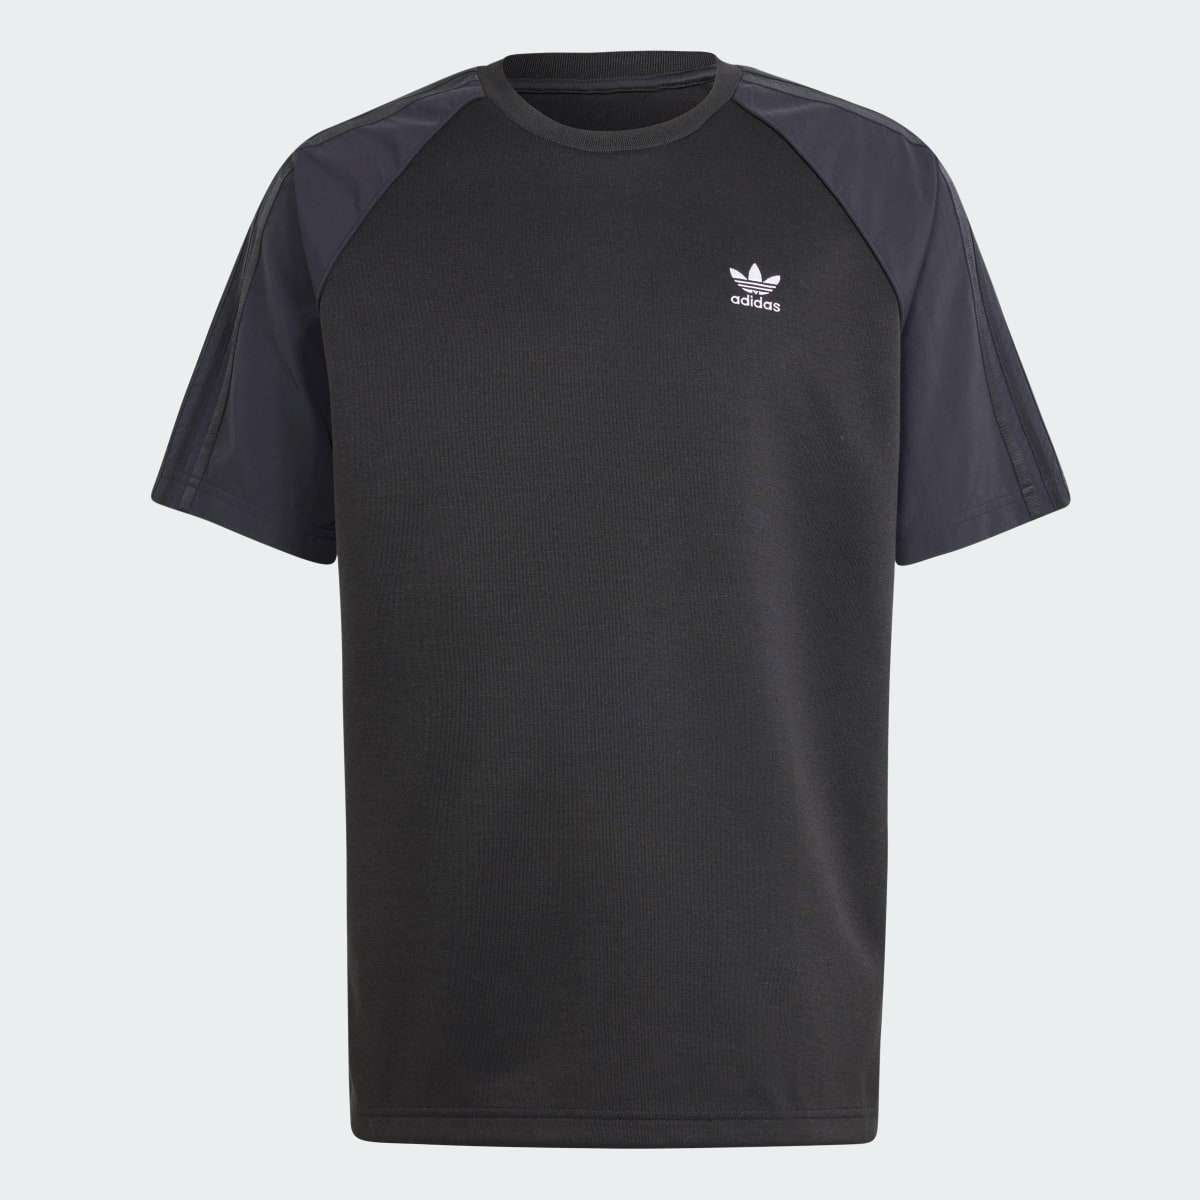 Adidas Adicolor Re-Pro SST Material Mix T-Shirt. 5